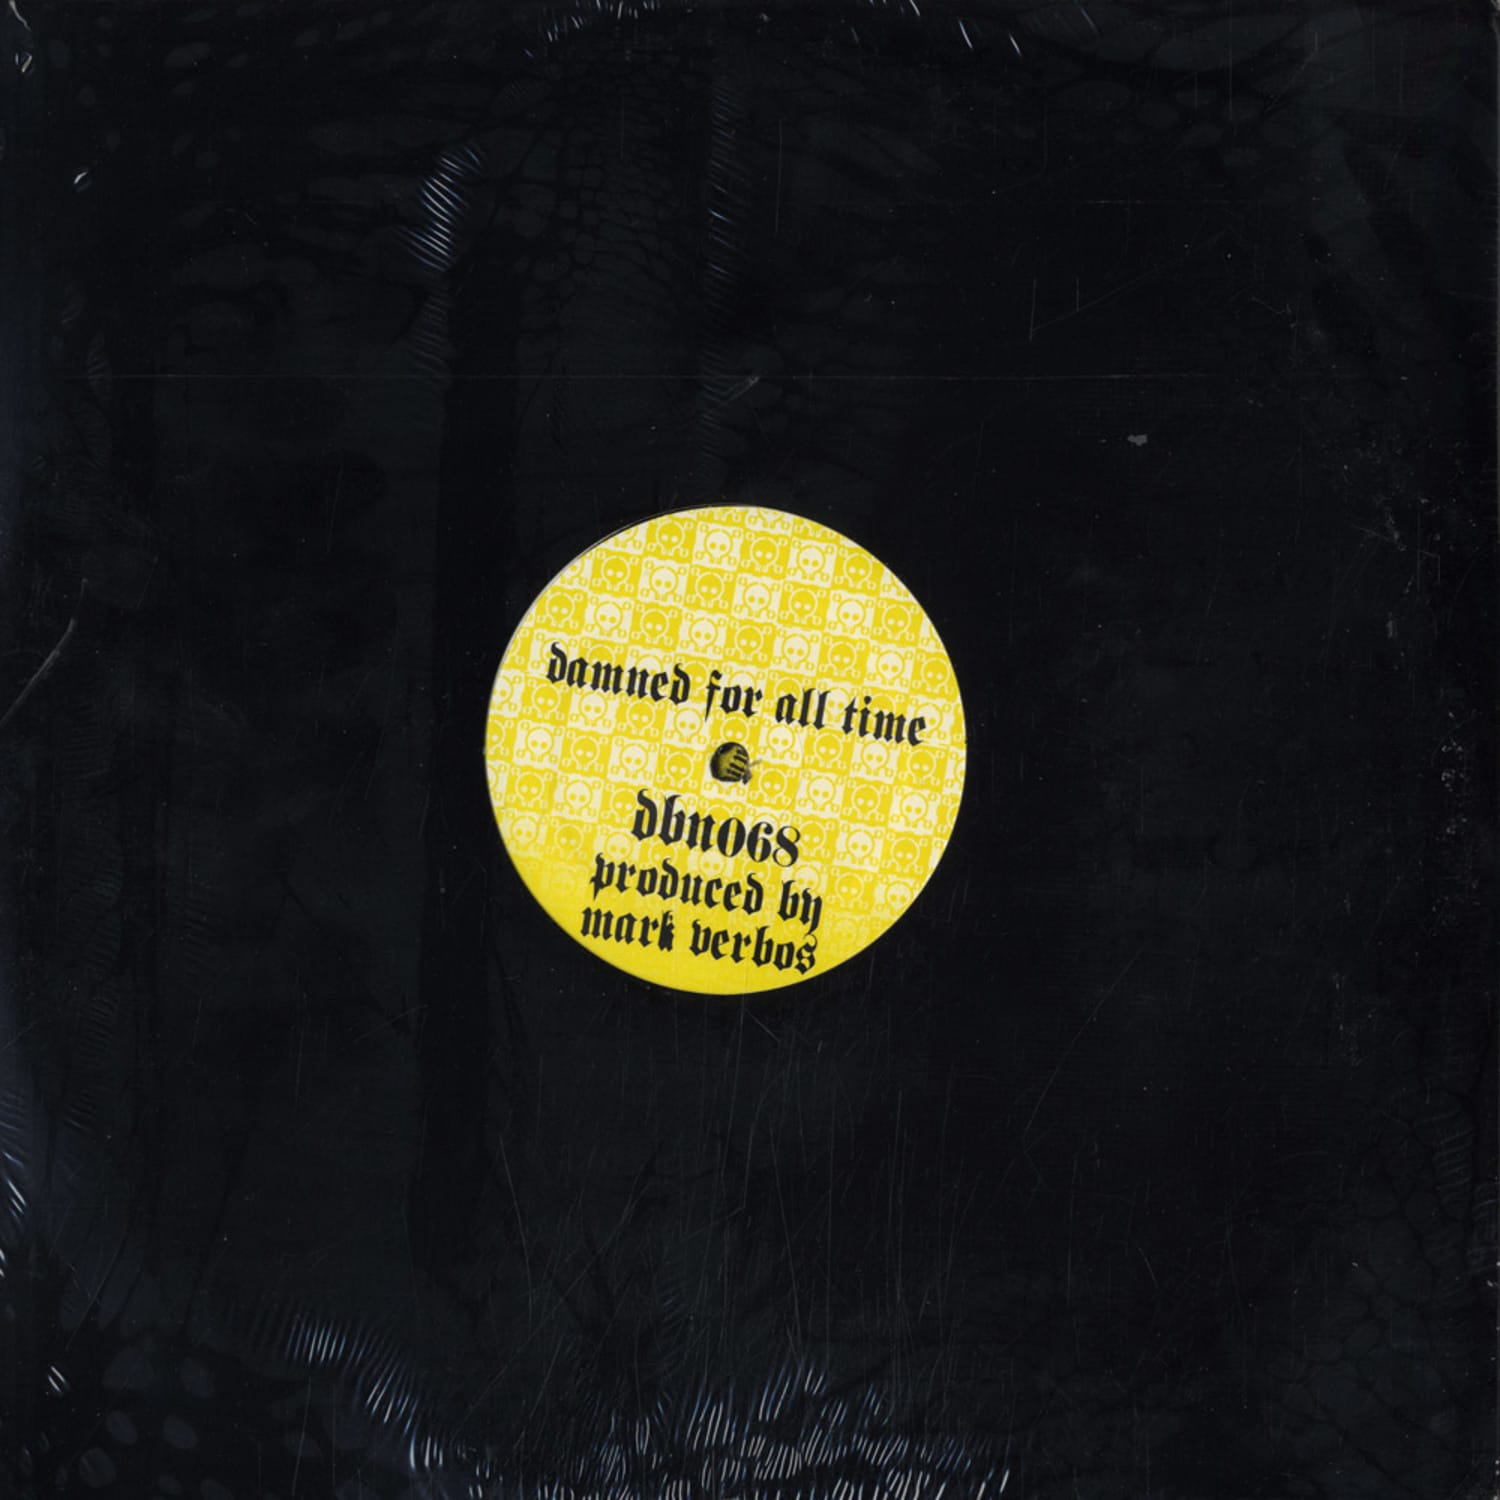 Mark Verbos - DAMNED FOR ALL TIME 2x12inch